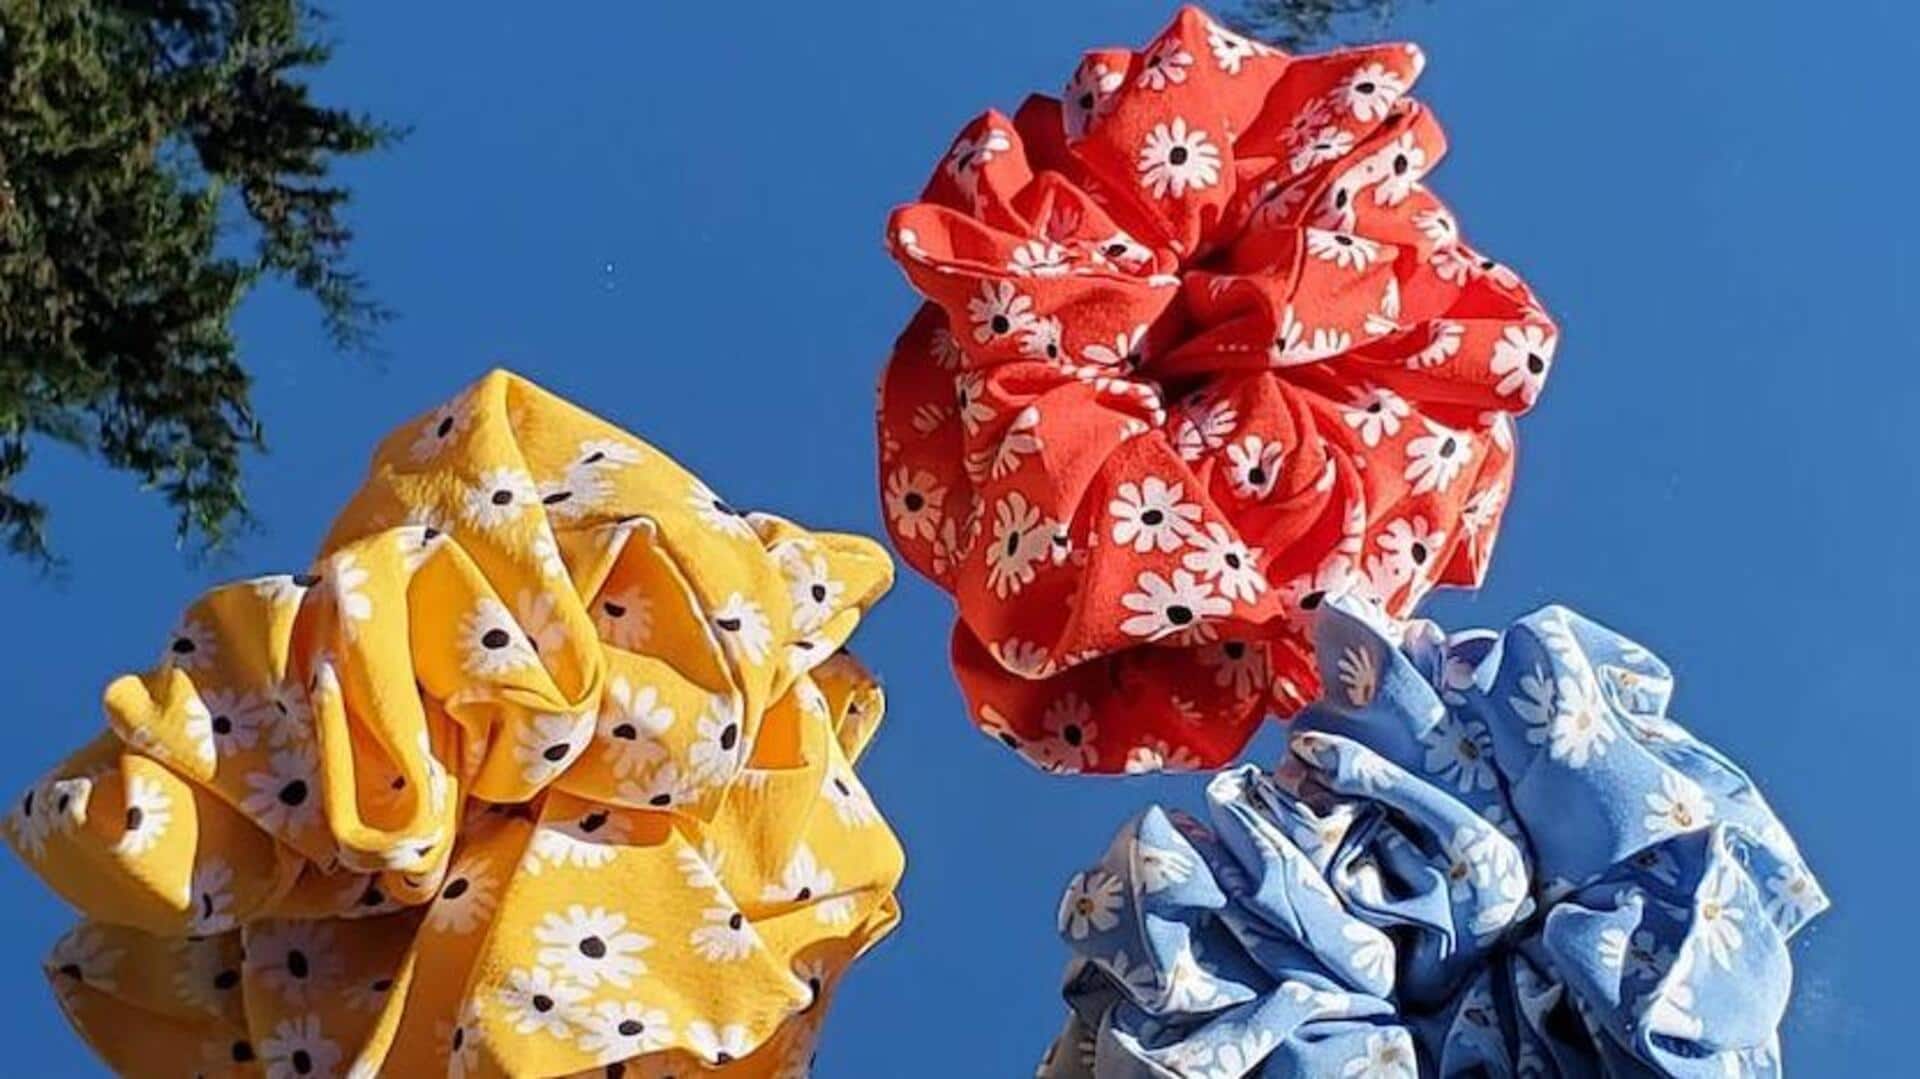 Do you know the history behind scrunchies